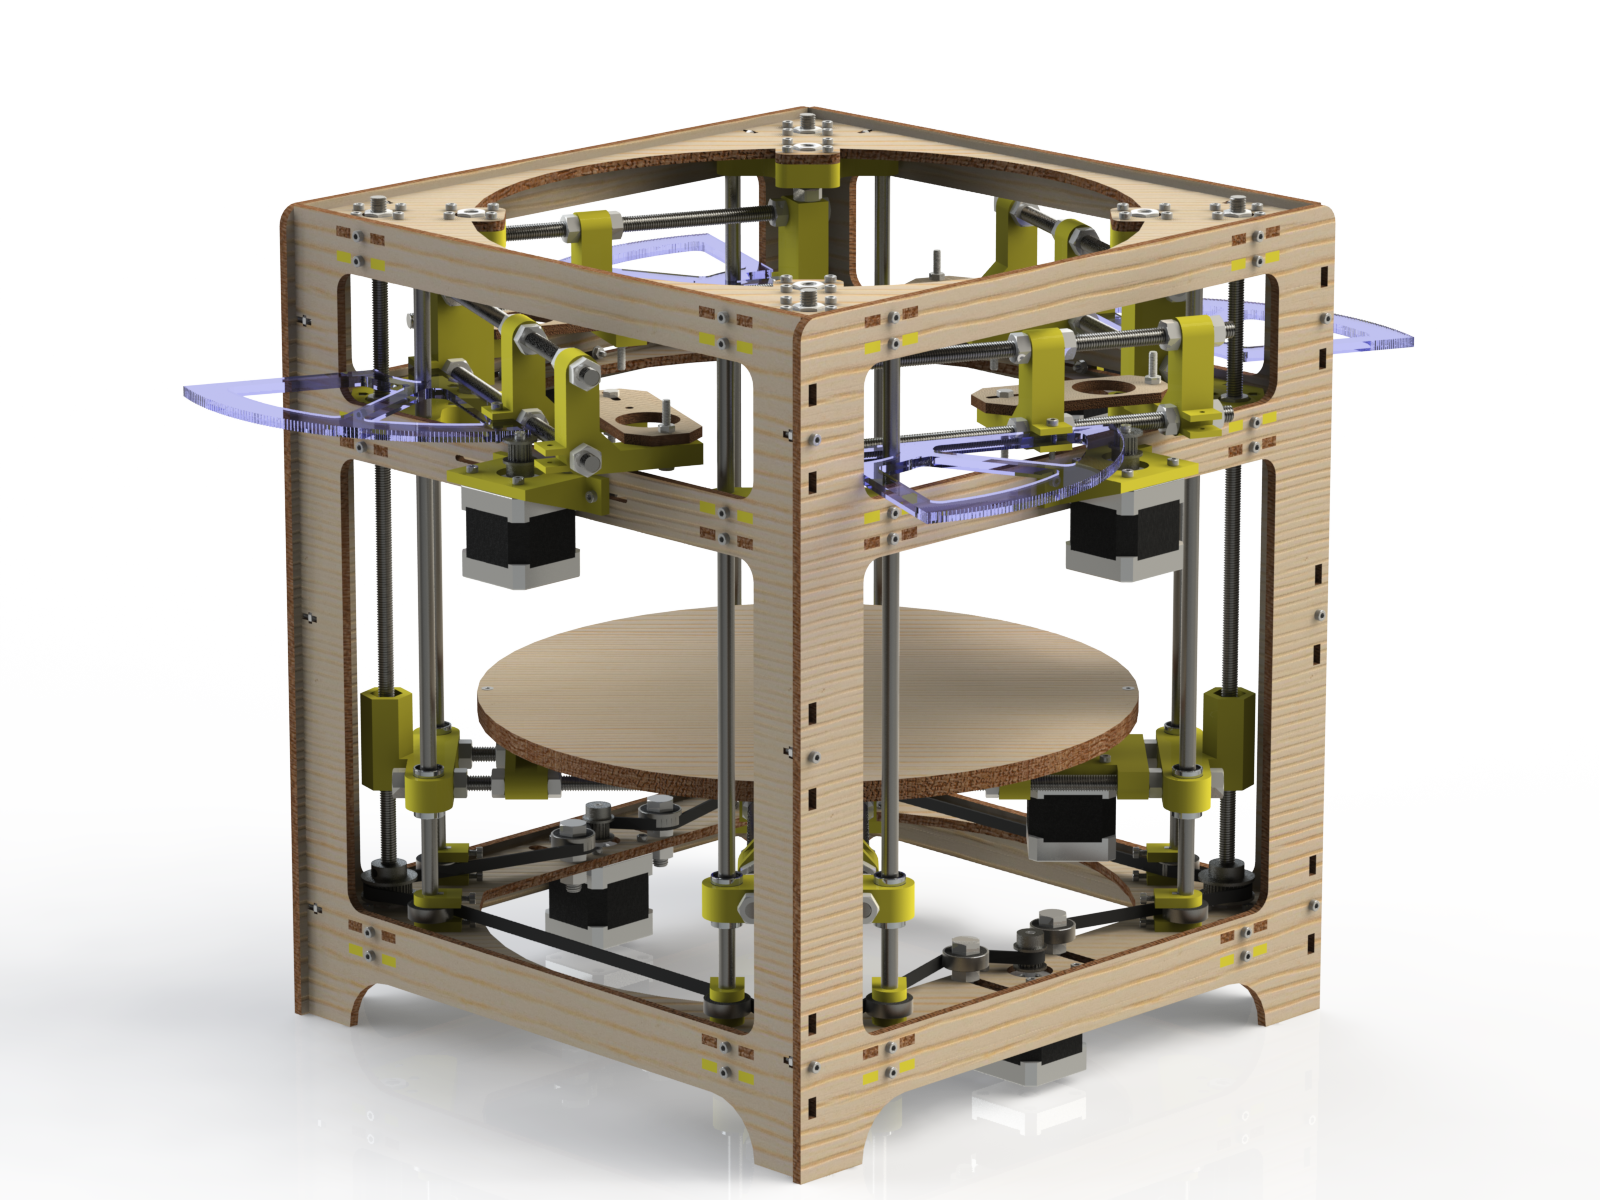 The Theta 3D Printer: 4 Extruders On A Polar Coordinate System